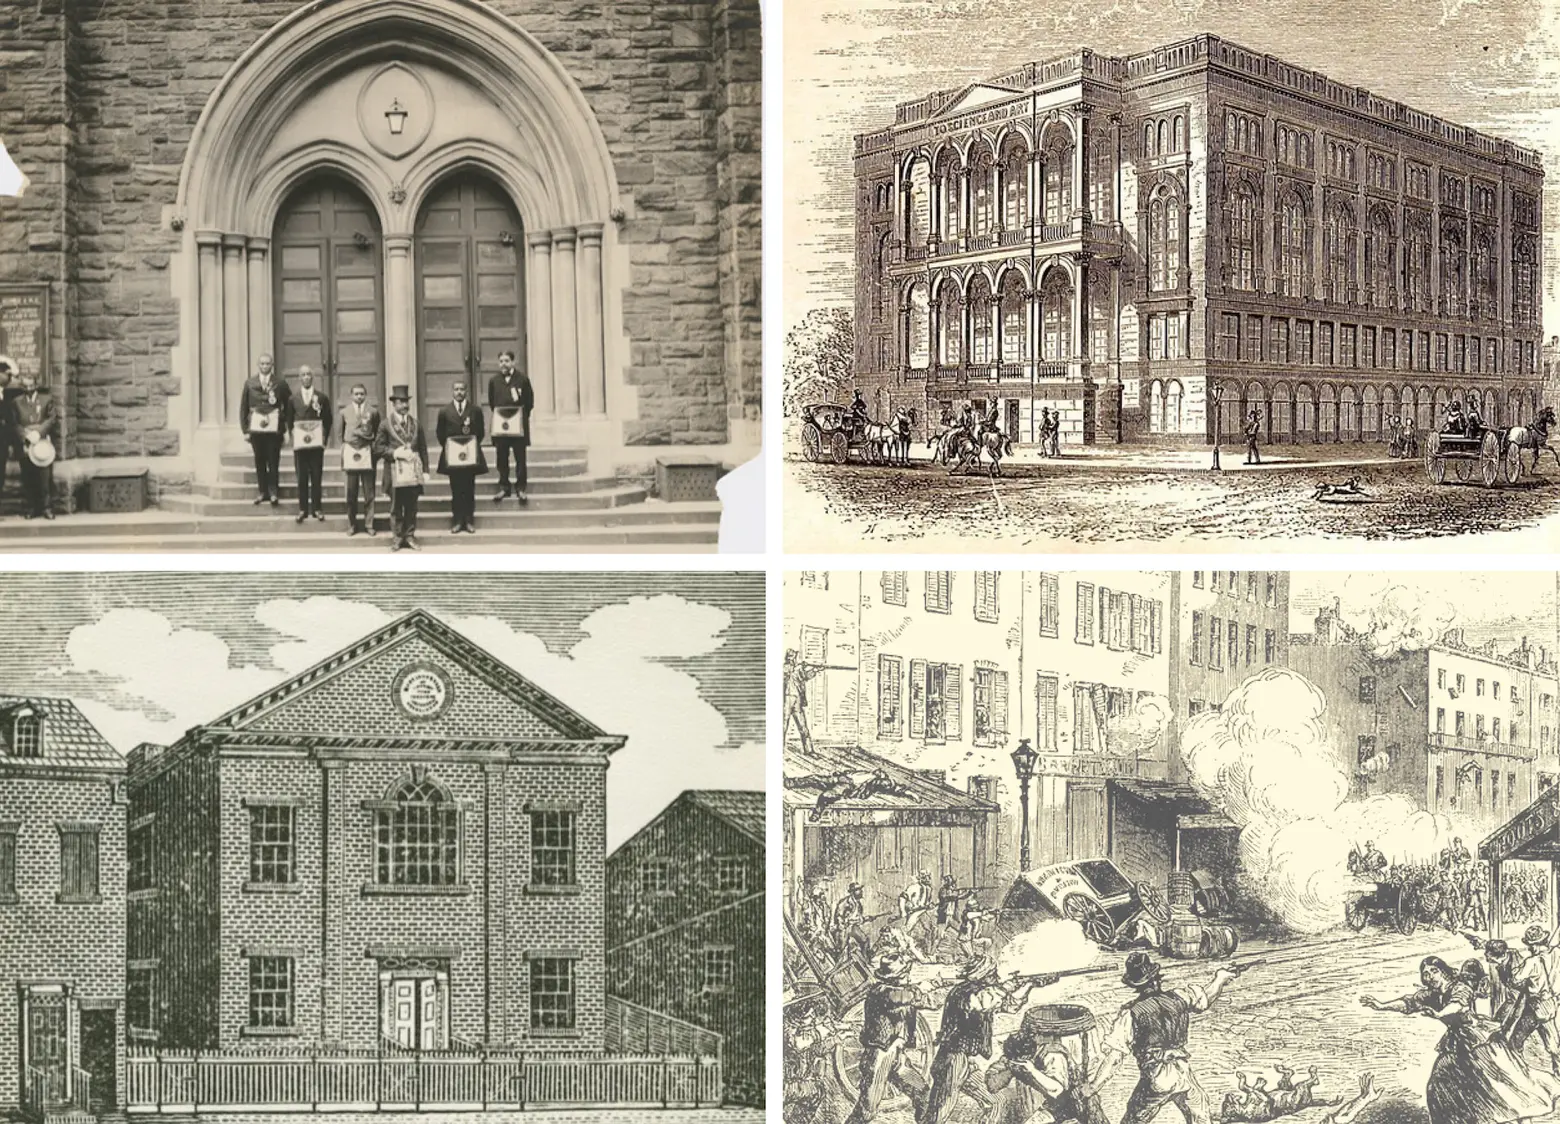 14 historic sites of the abolitionist movement in Greenwich Village